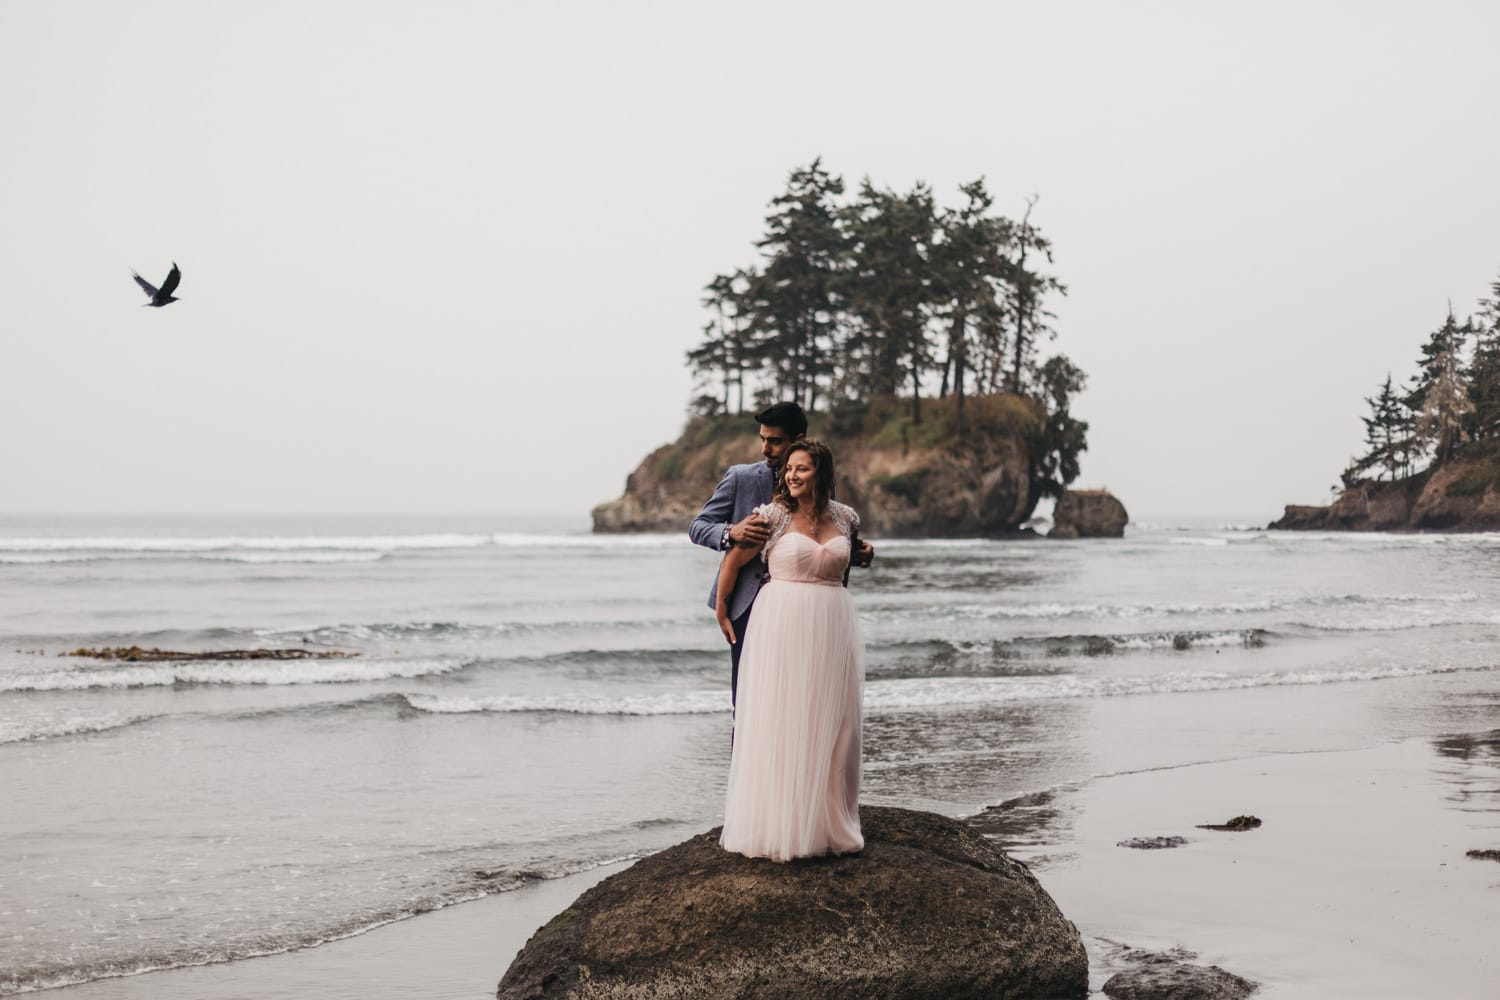 bird flying over couple on the olympic peninsula elopement by marcela pulido portland oregon wedding and elopement photographer